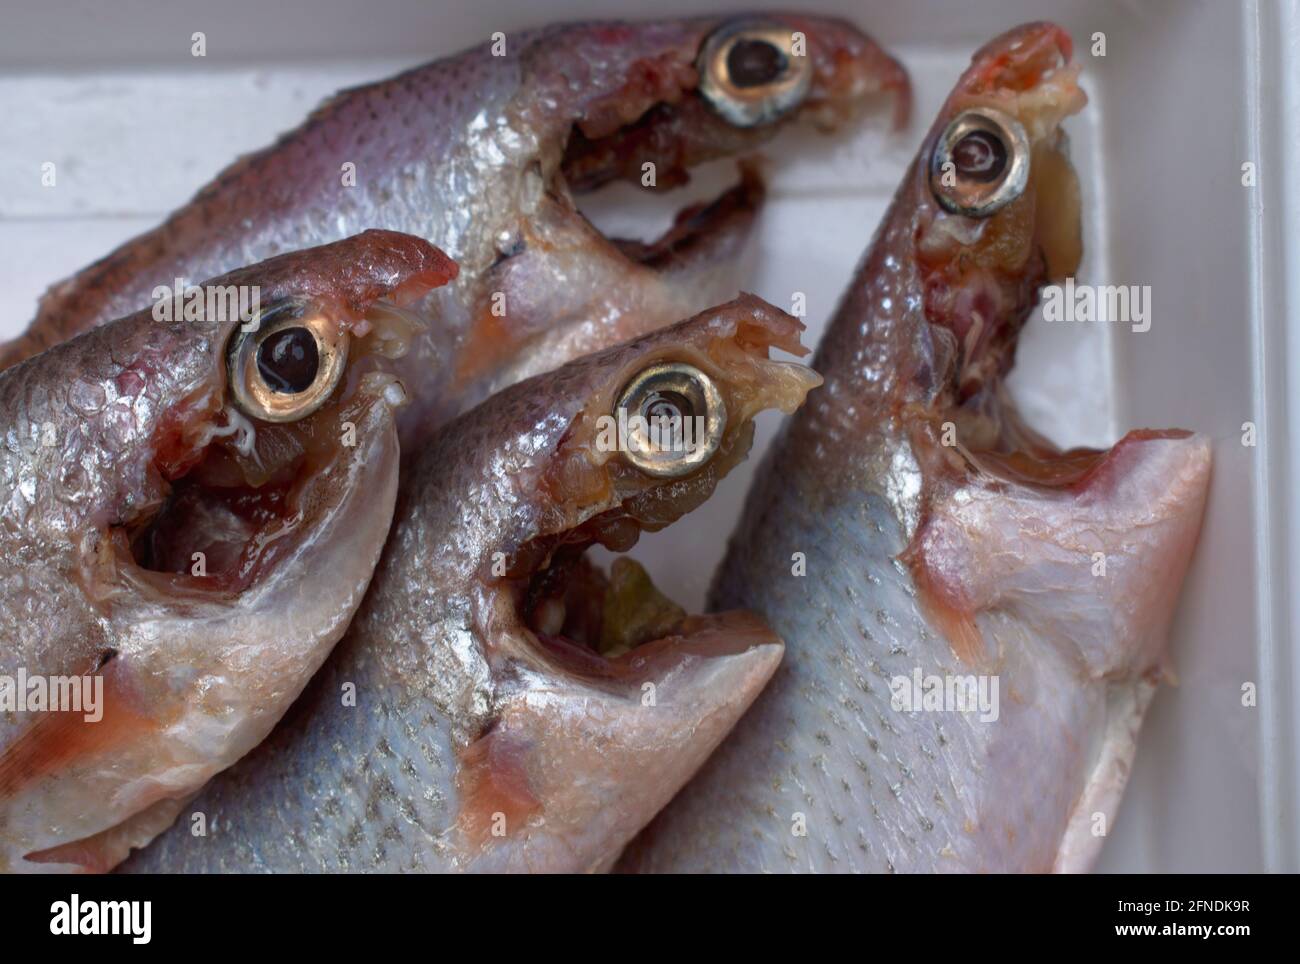 Cleaned & Cut Poa Fishes Vola Fishes landscape Raw Food Image Stock Photo